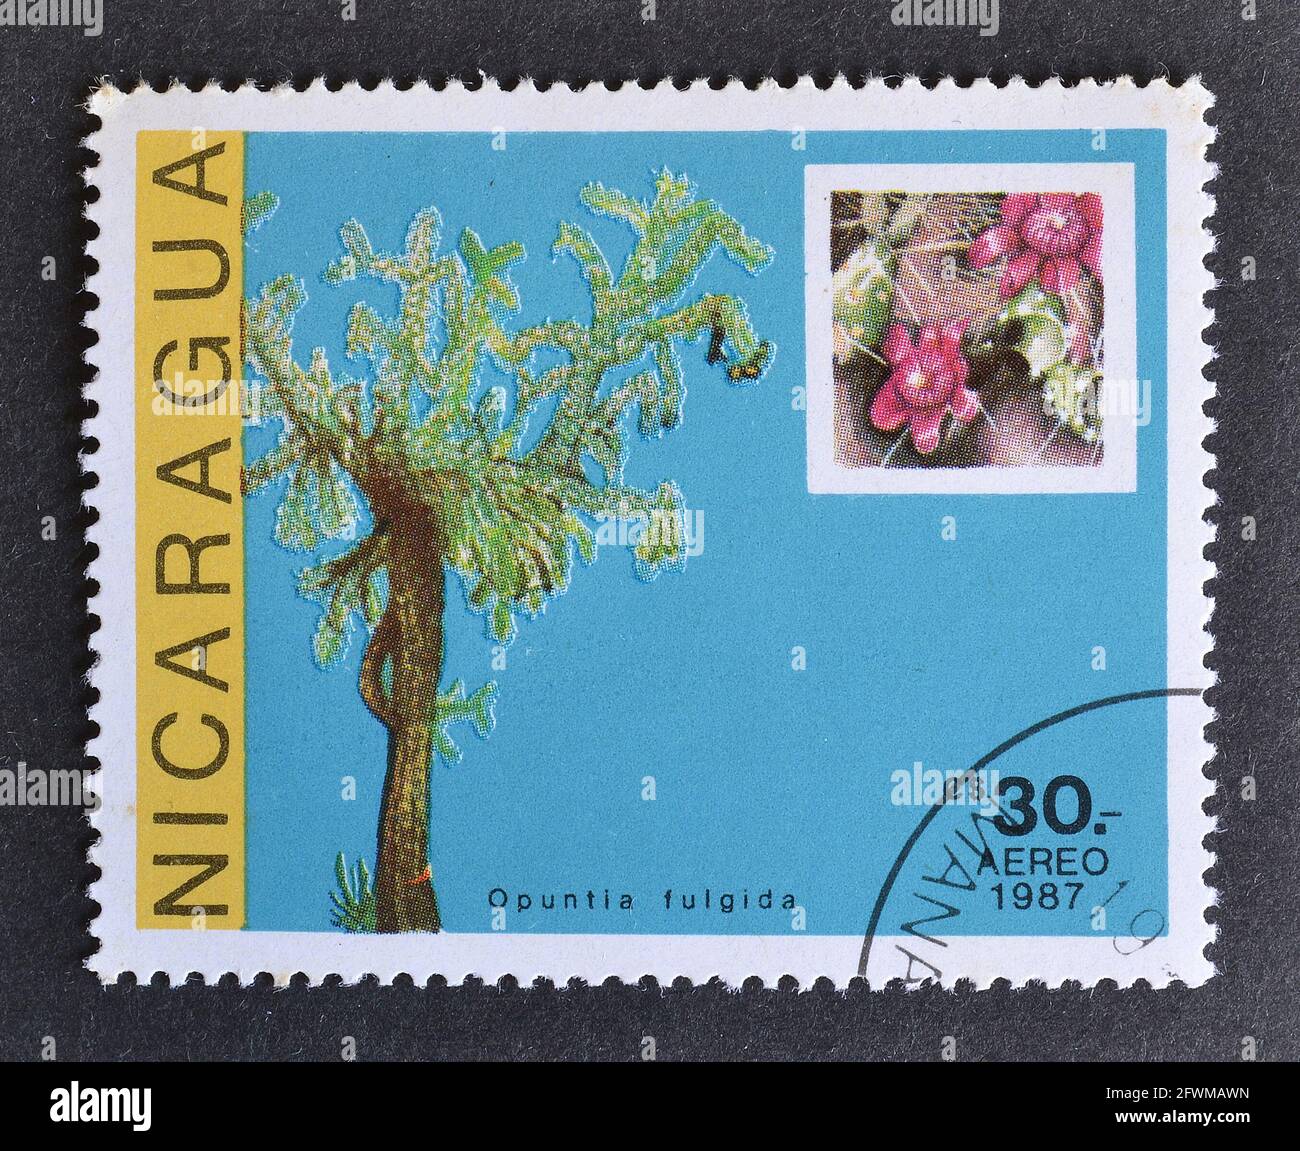 Cancelled postage stamp printed by Nicaragua, that shows Opuntia Fulgida cactus, circa 1987. Stock Photo